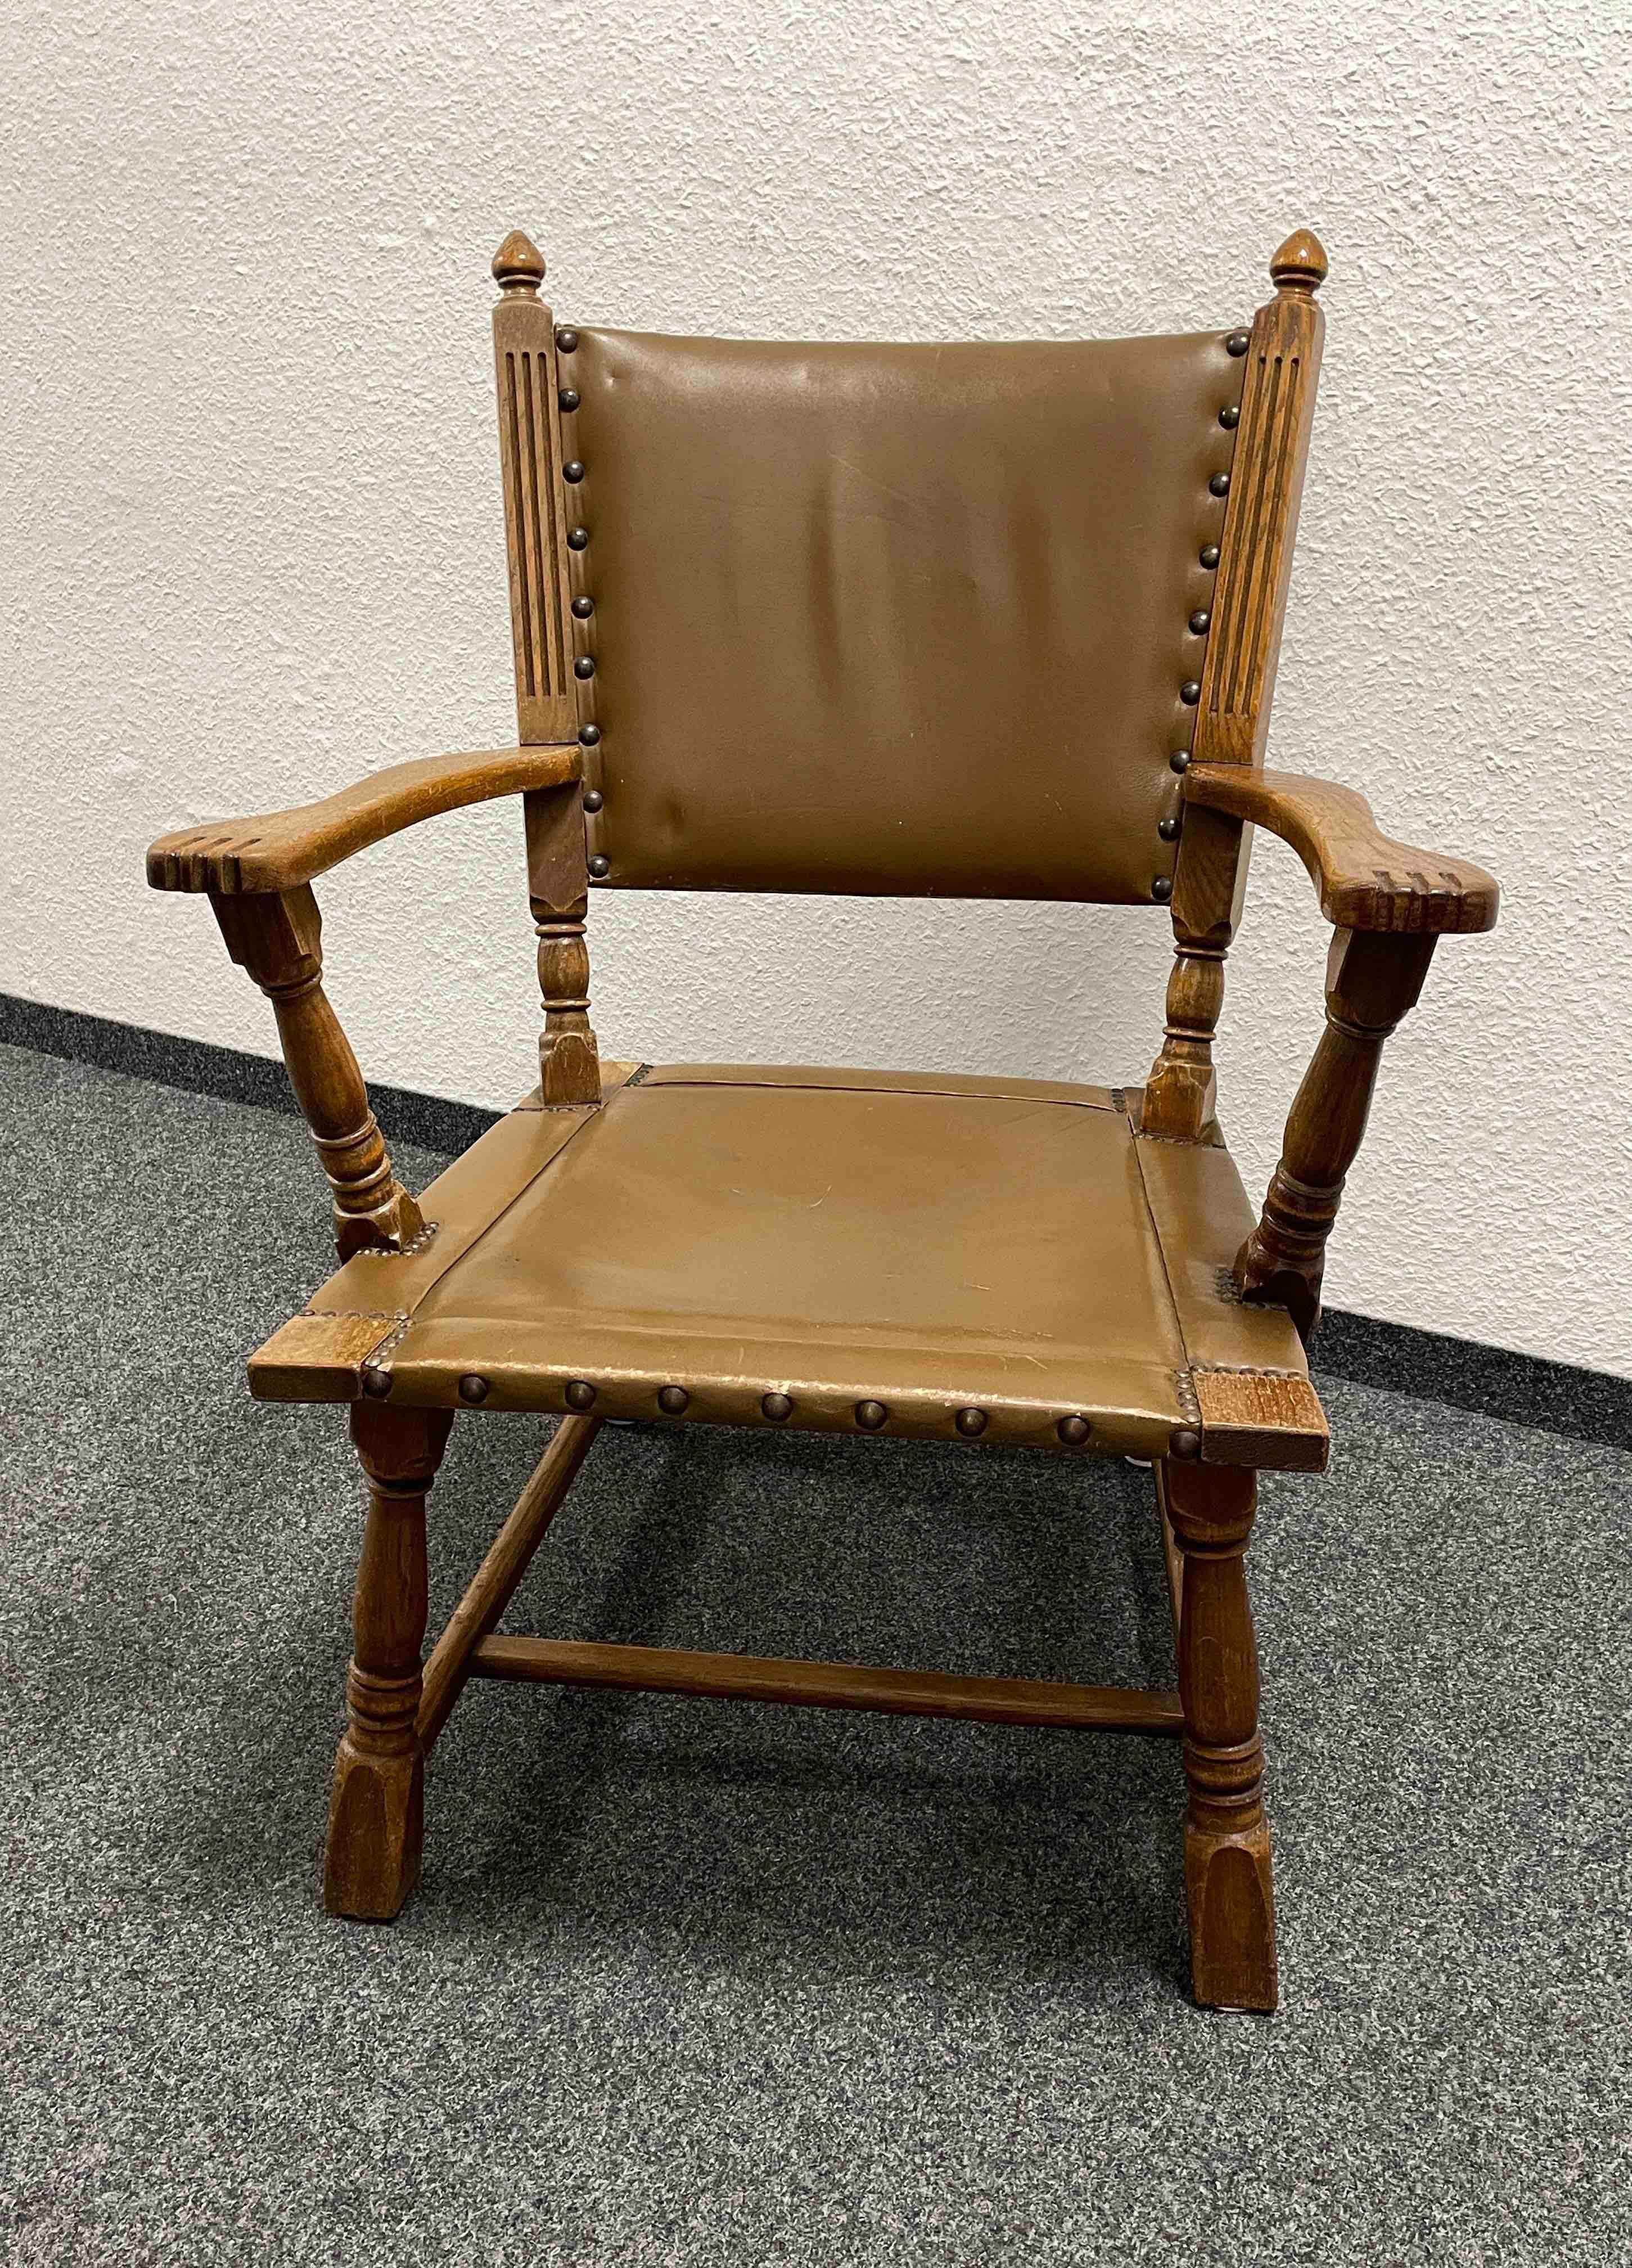 Hand-Crafted Antique German Leather & Wood Armchair with Brass Nailhead Details For Sale